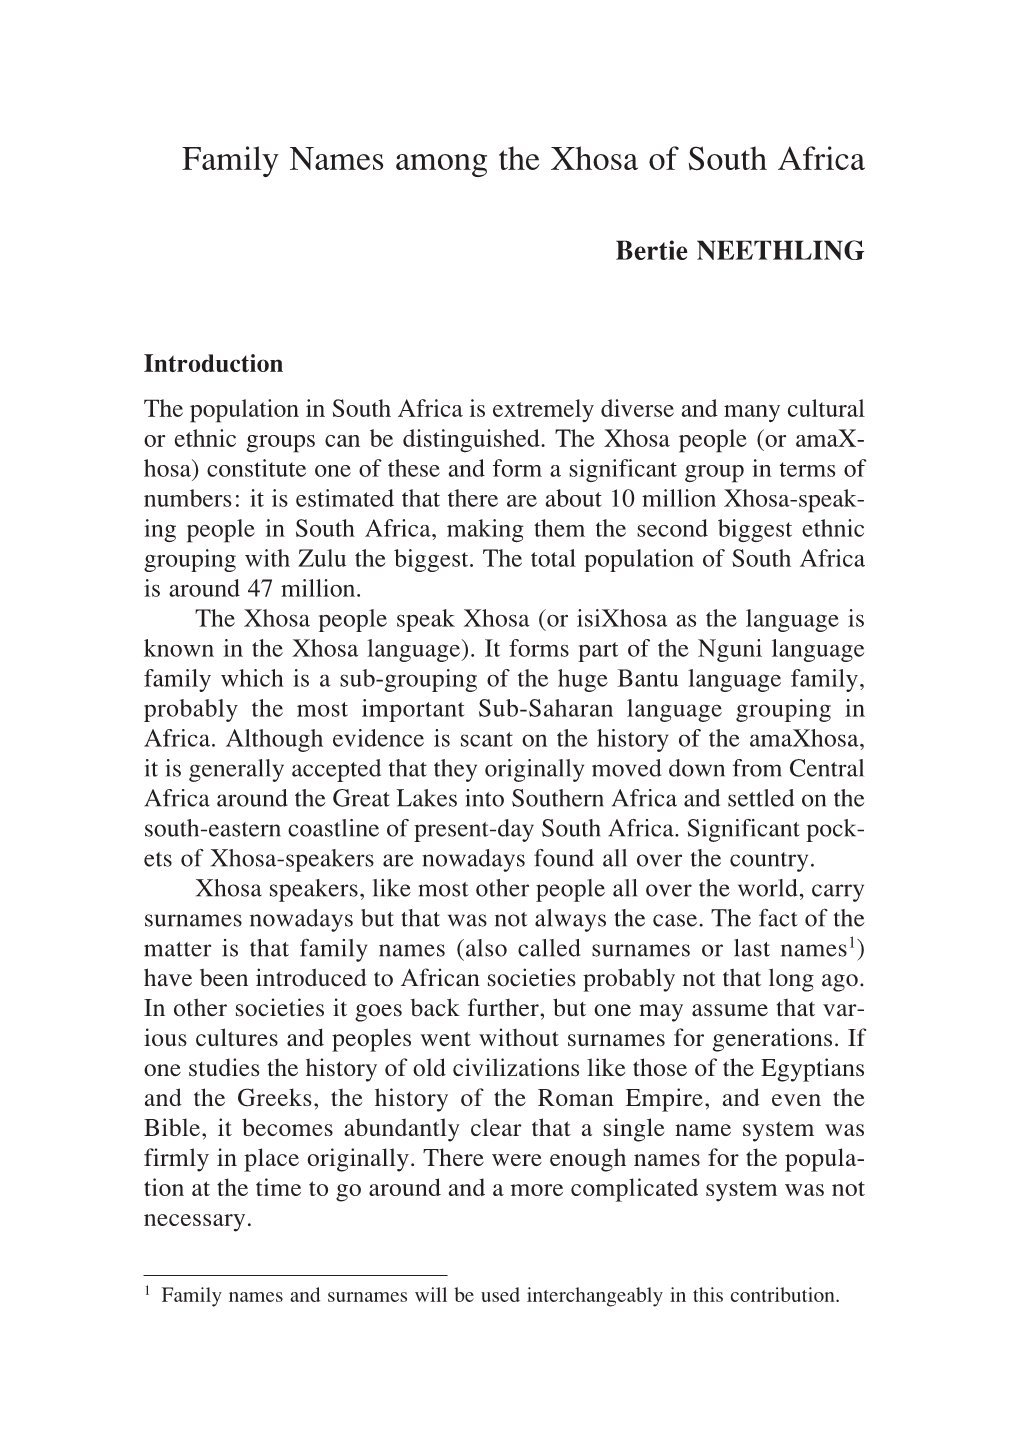 Family Names Among the Xhosa of South Africa